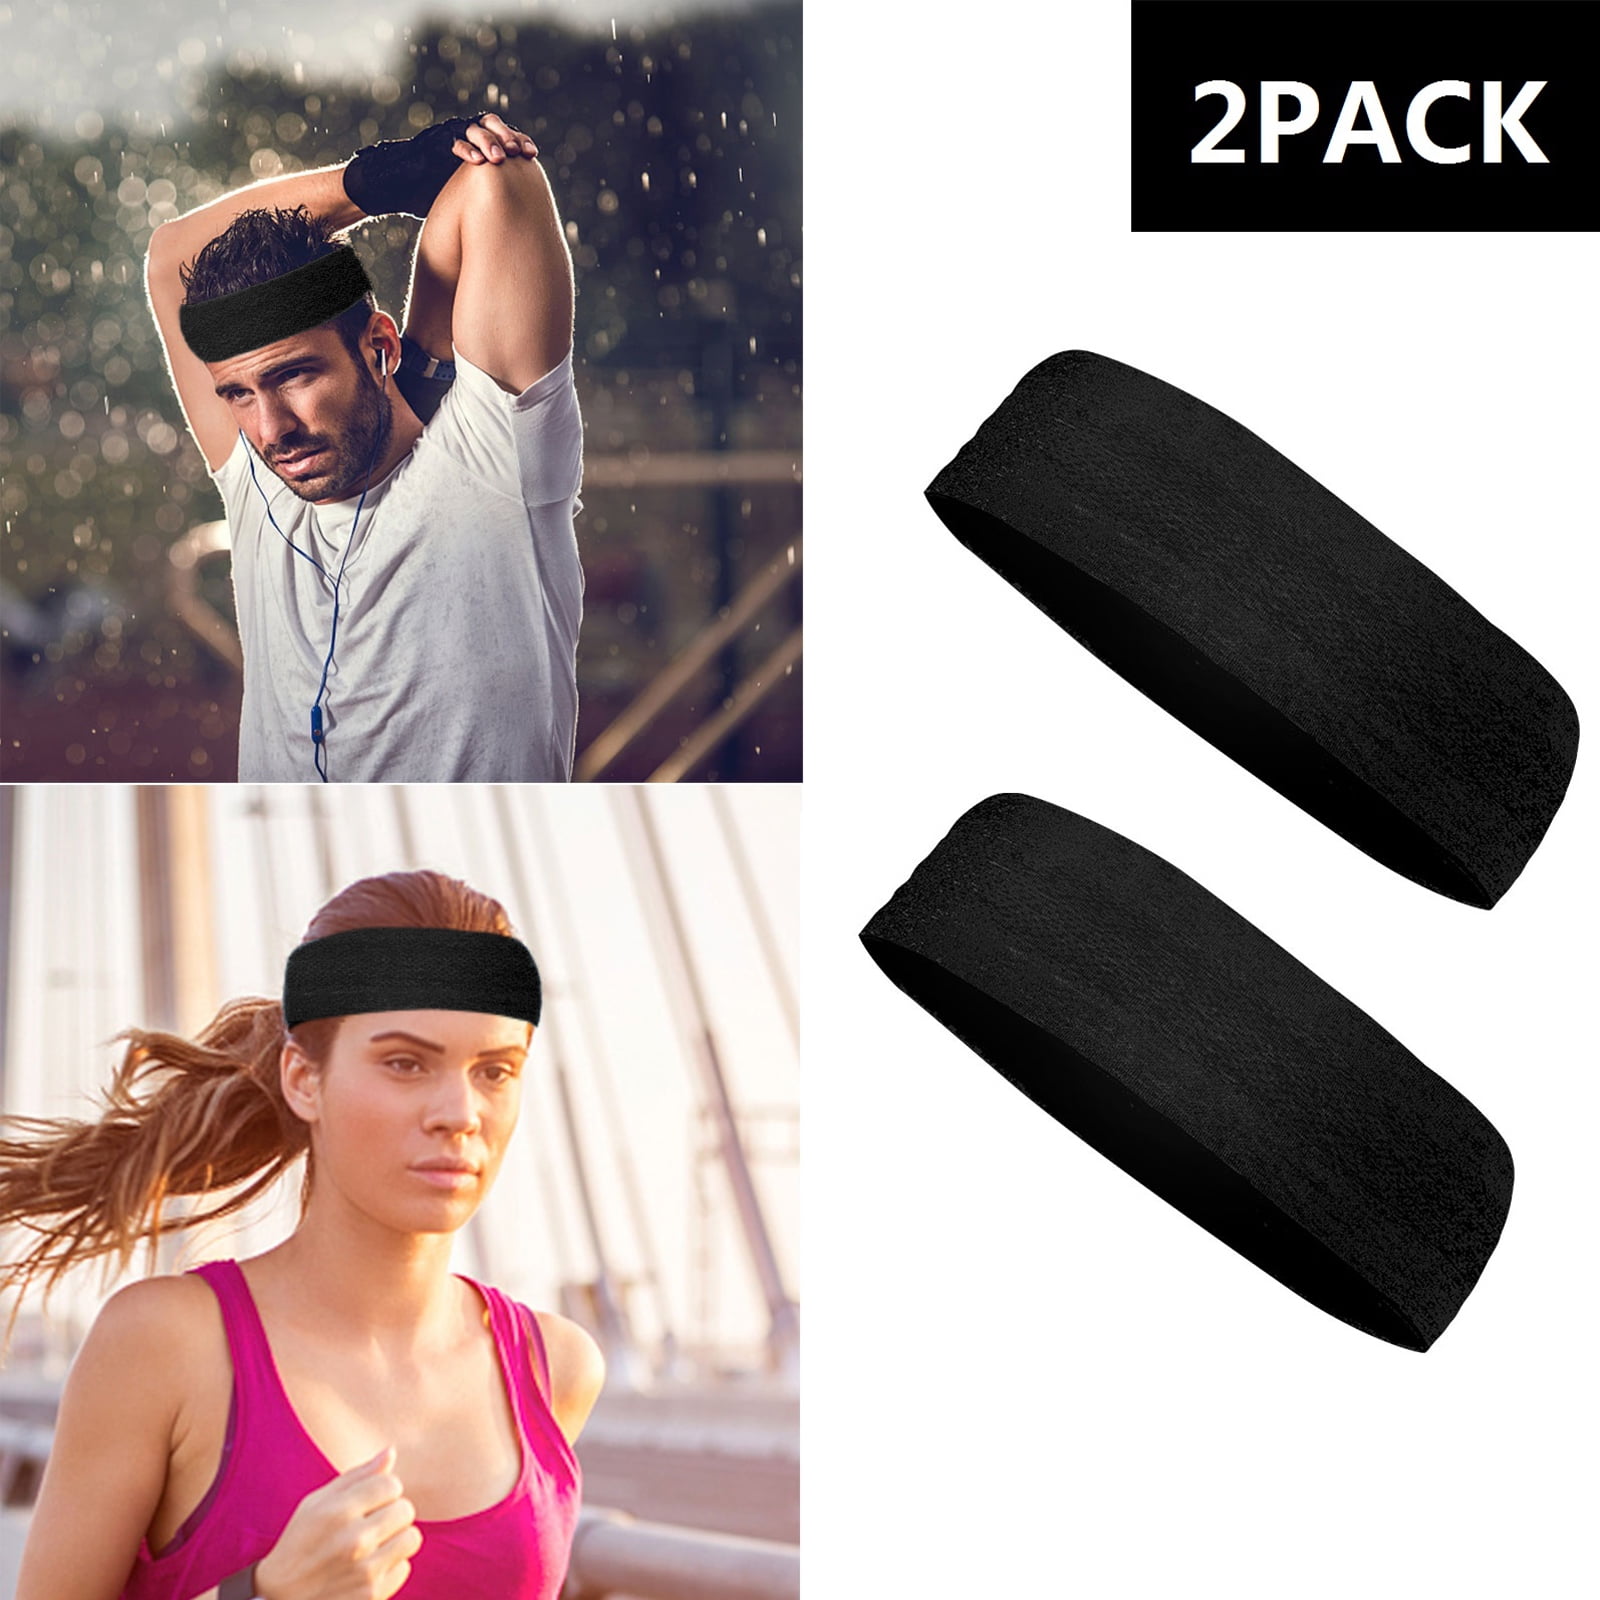 ToNoOne Sweatbands Sports Headband for Men & Women Workout Gym Moisture Wicking Athletic Terry Cloth Sweatband for Running 